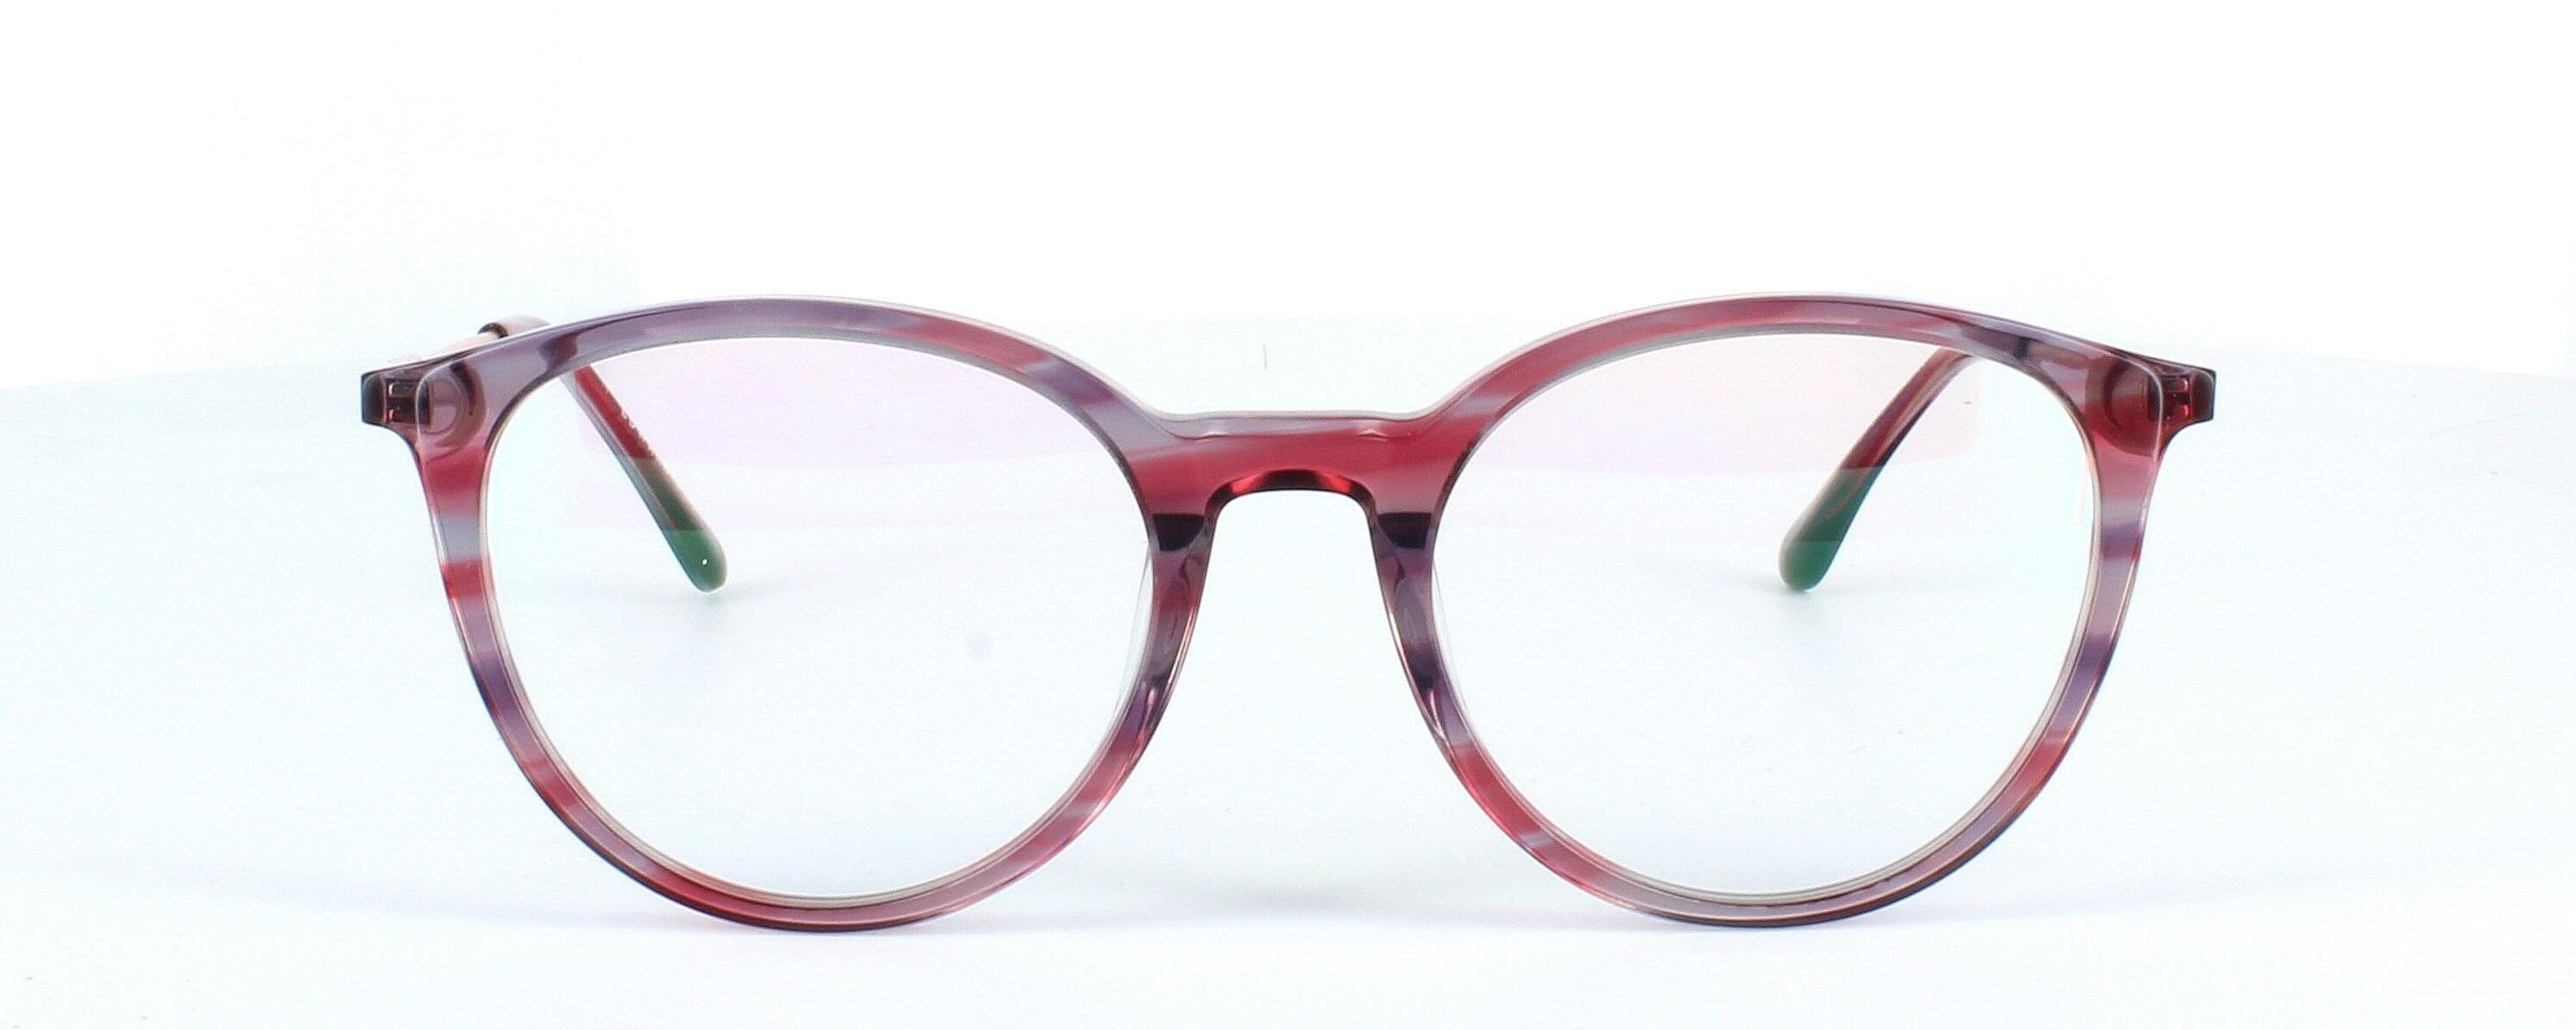 Edward Scotts BJ9201 C614 - Women's round shaped shiny burgundy, purple & grey acetate glasses with gold metal spring hinged arms - image view 2